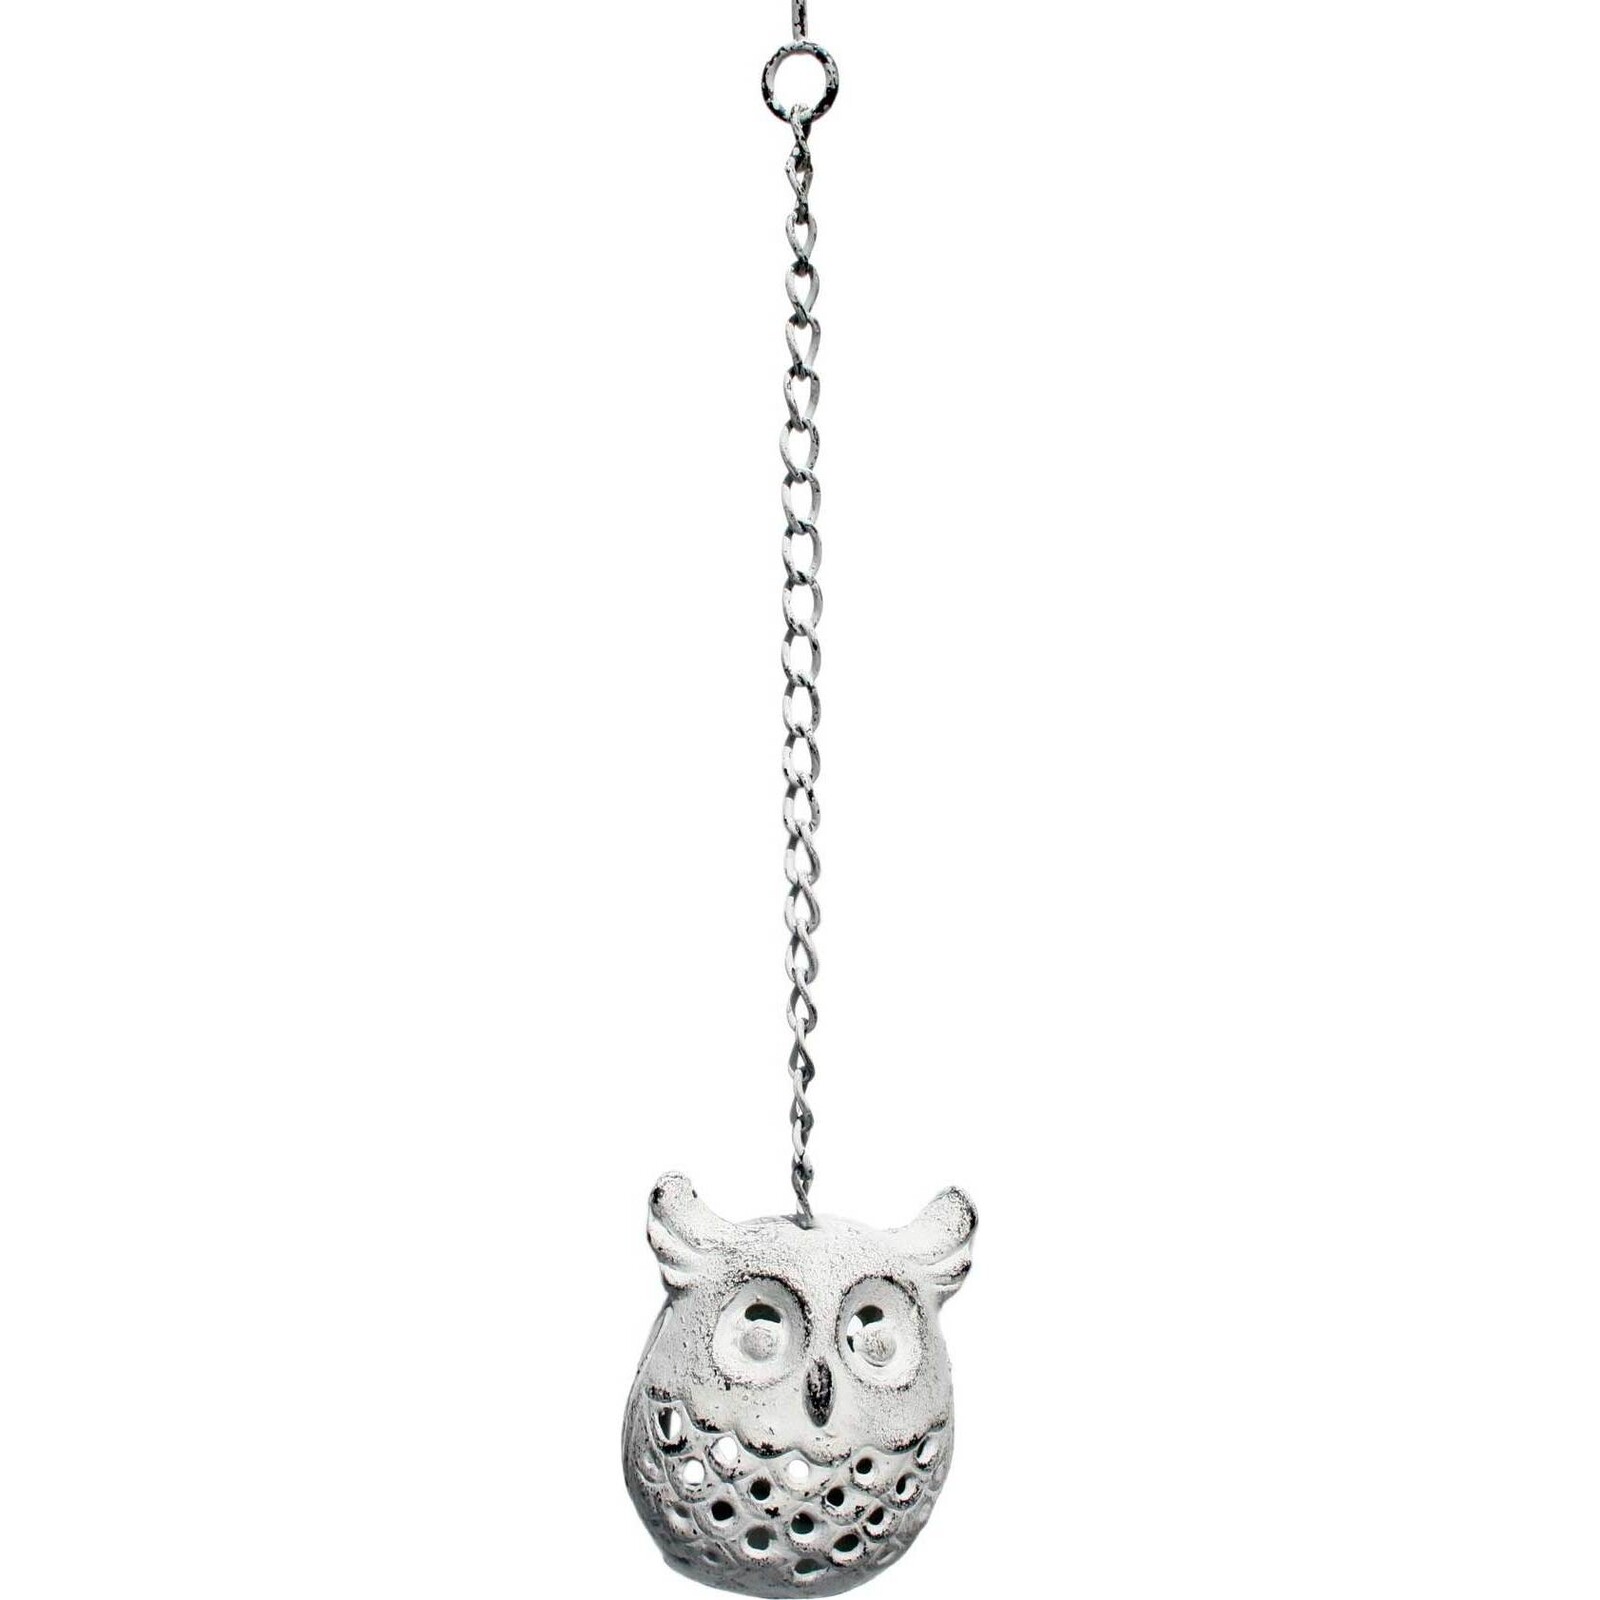 Hanging Bell - Fat Owl